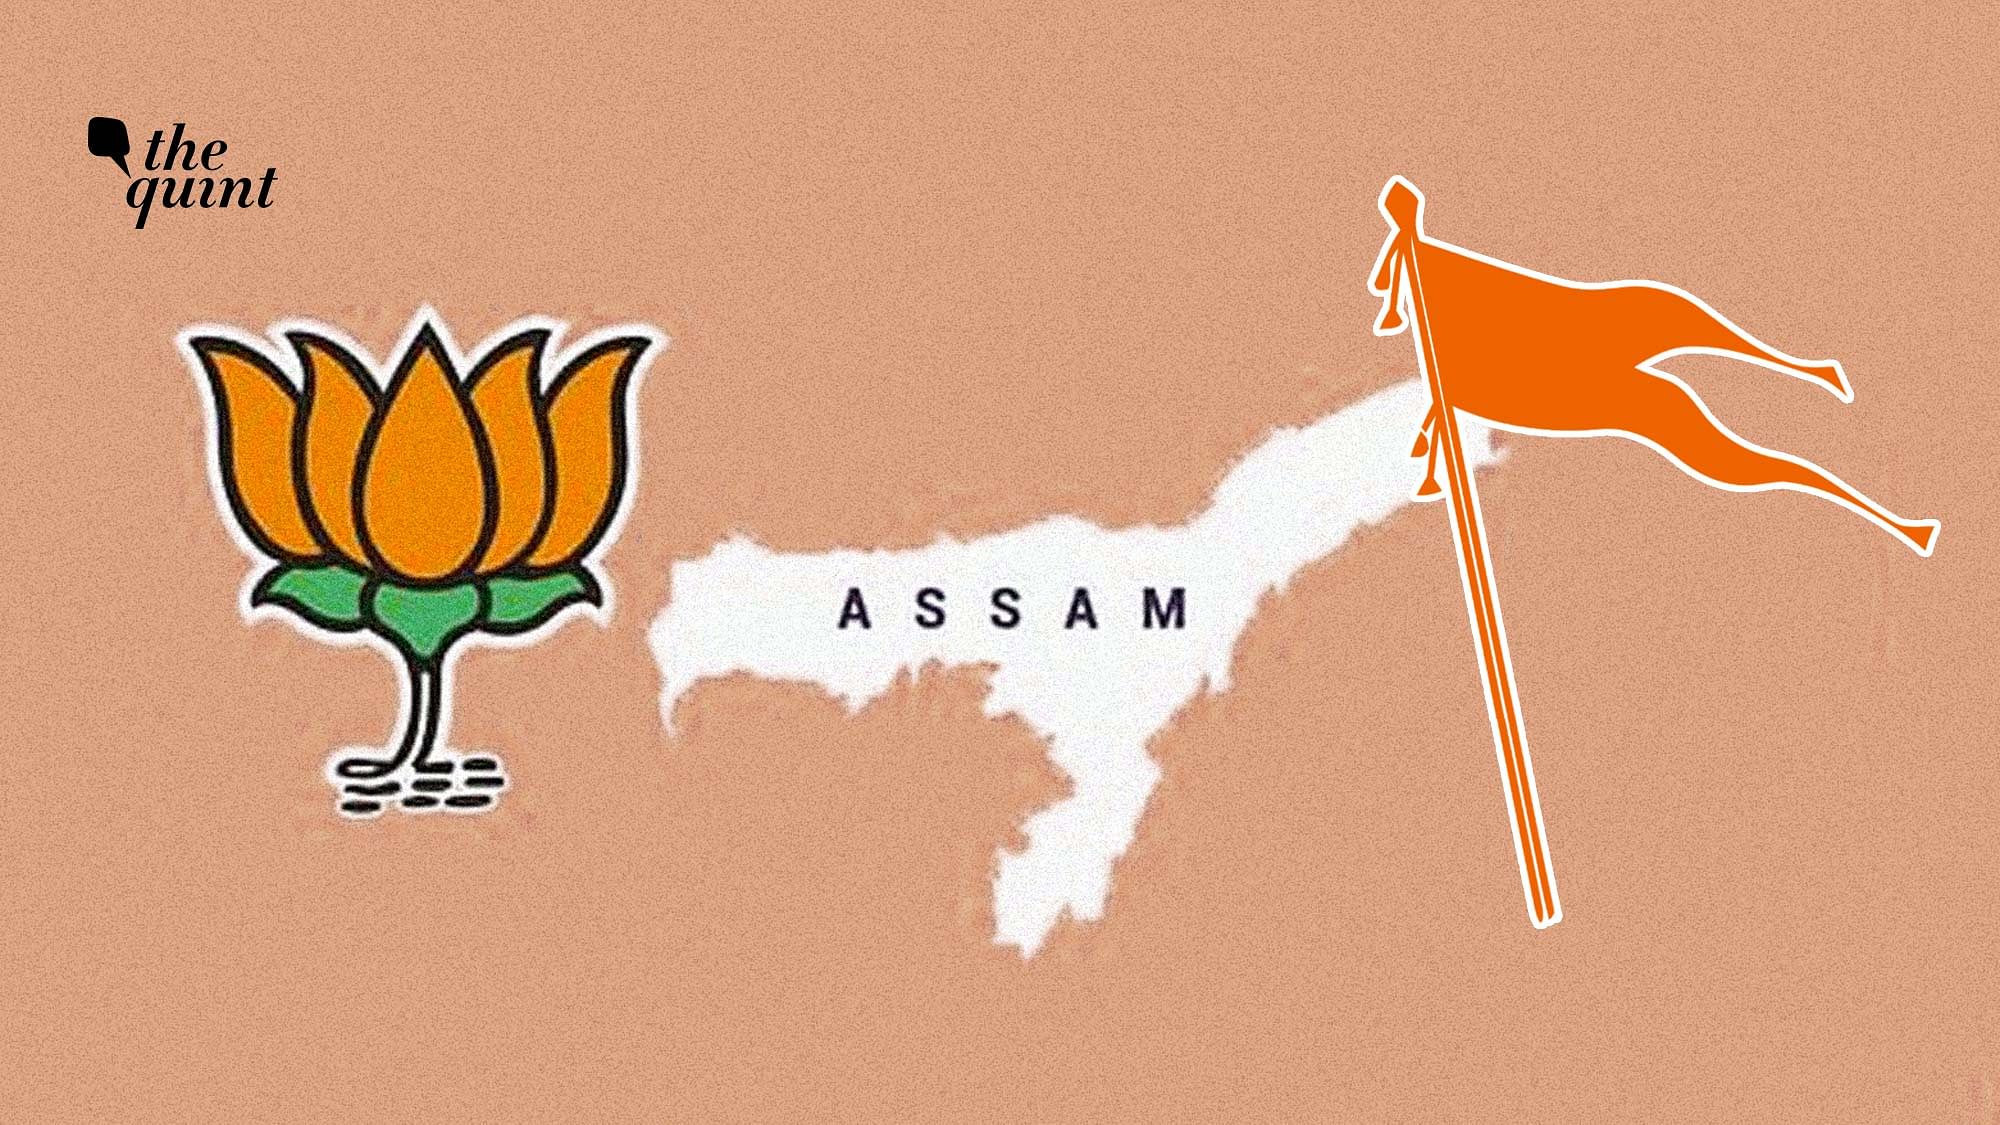 Image of the BJP &amp; RSS’s symbols and the Assam map used for representational purposes.&nbsp;